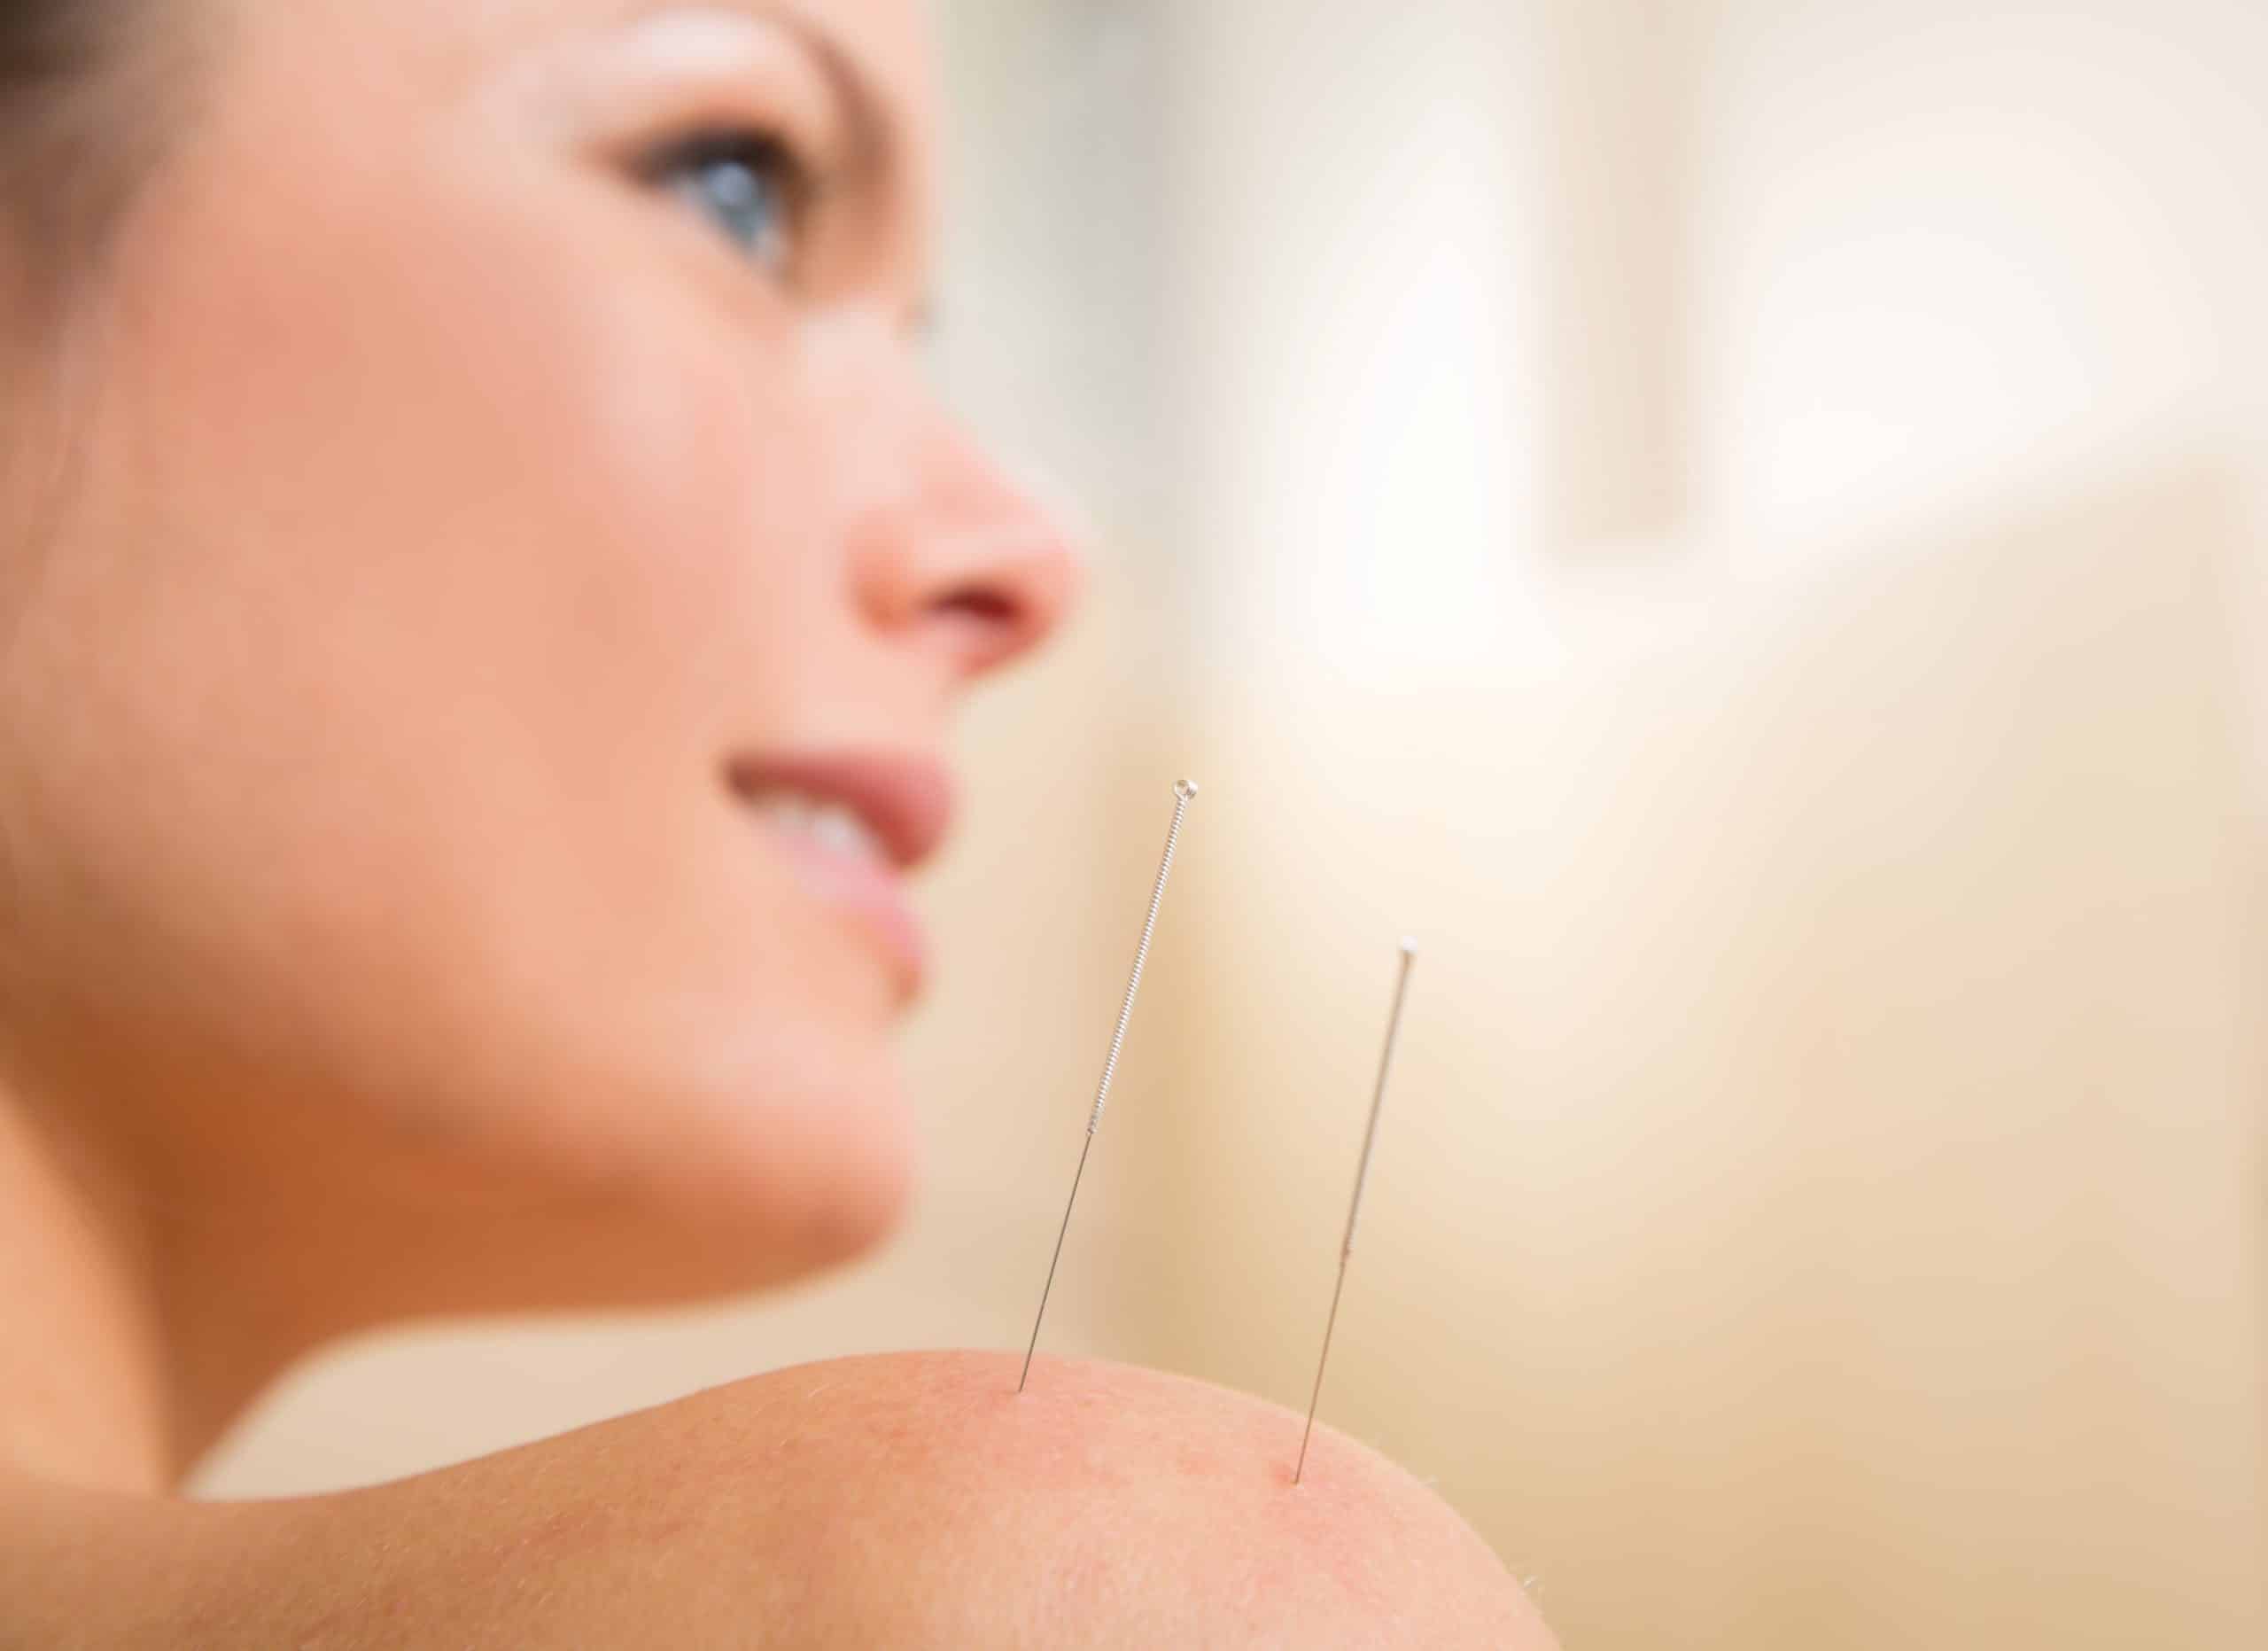 How Acupuncture Can Help Combat Opioid Addiction